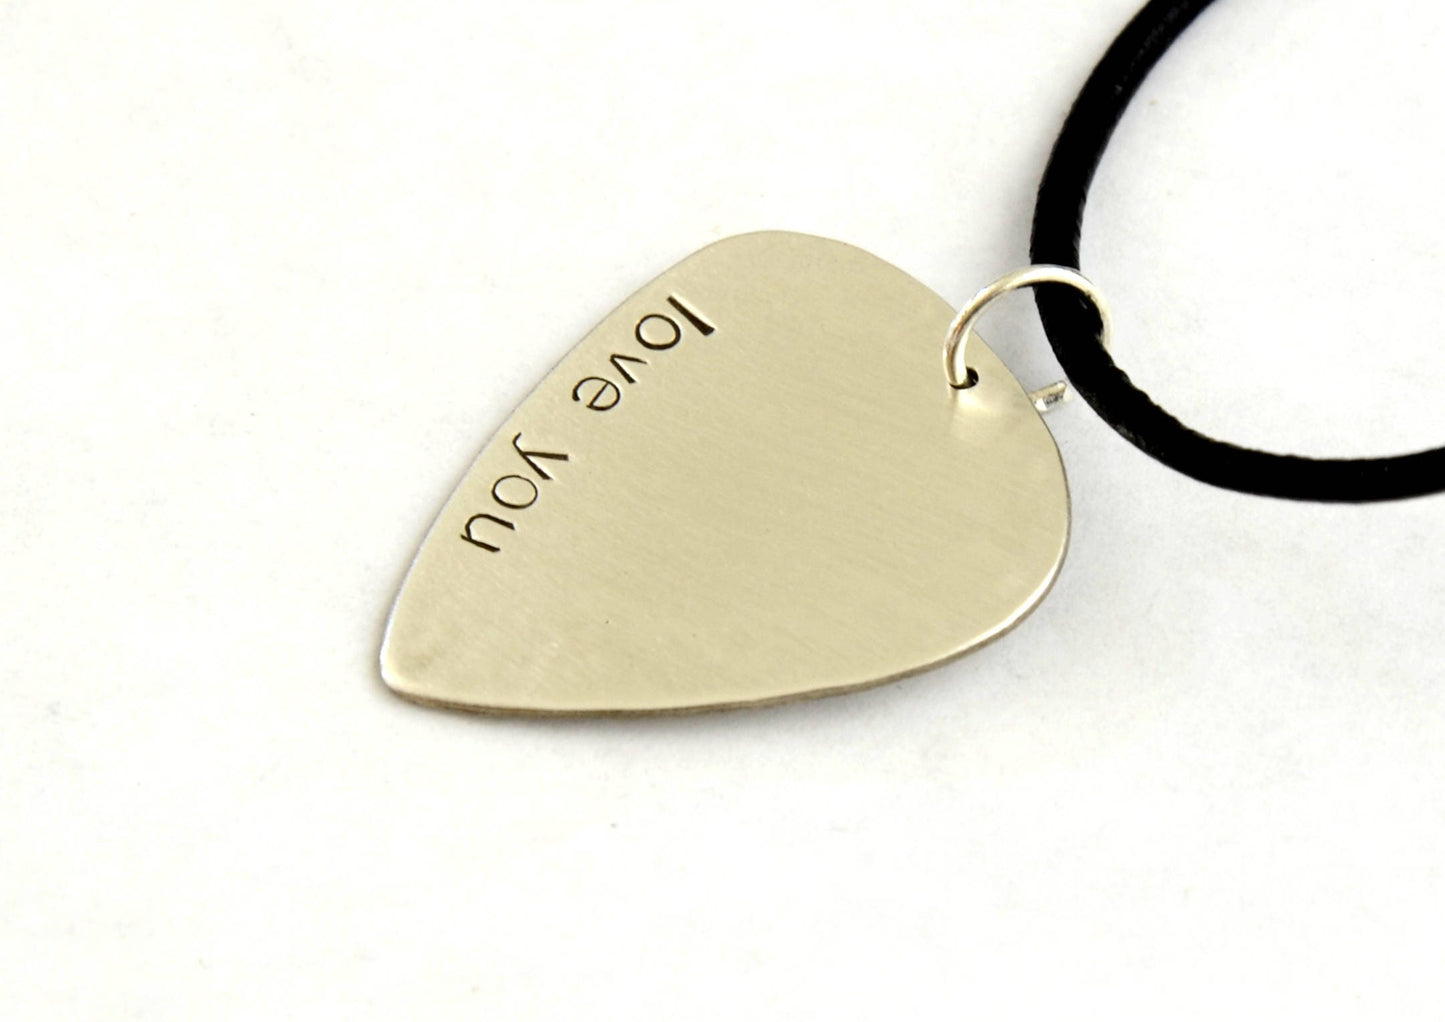 I Love You Guitar Pick Necklace in Sterling Silver